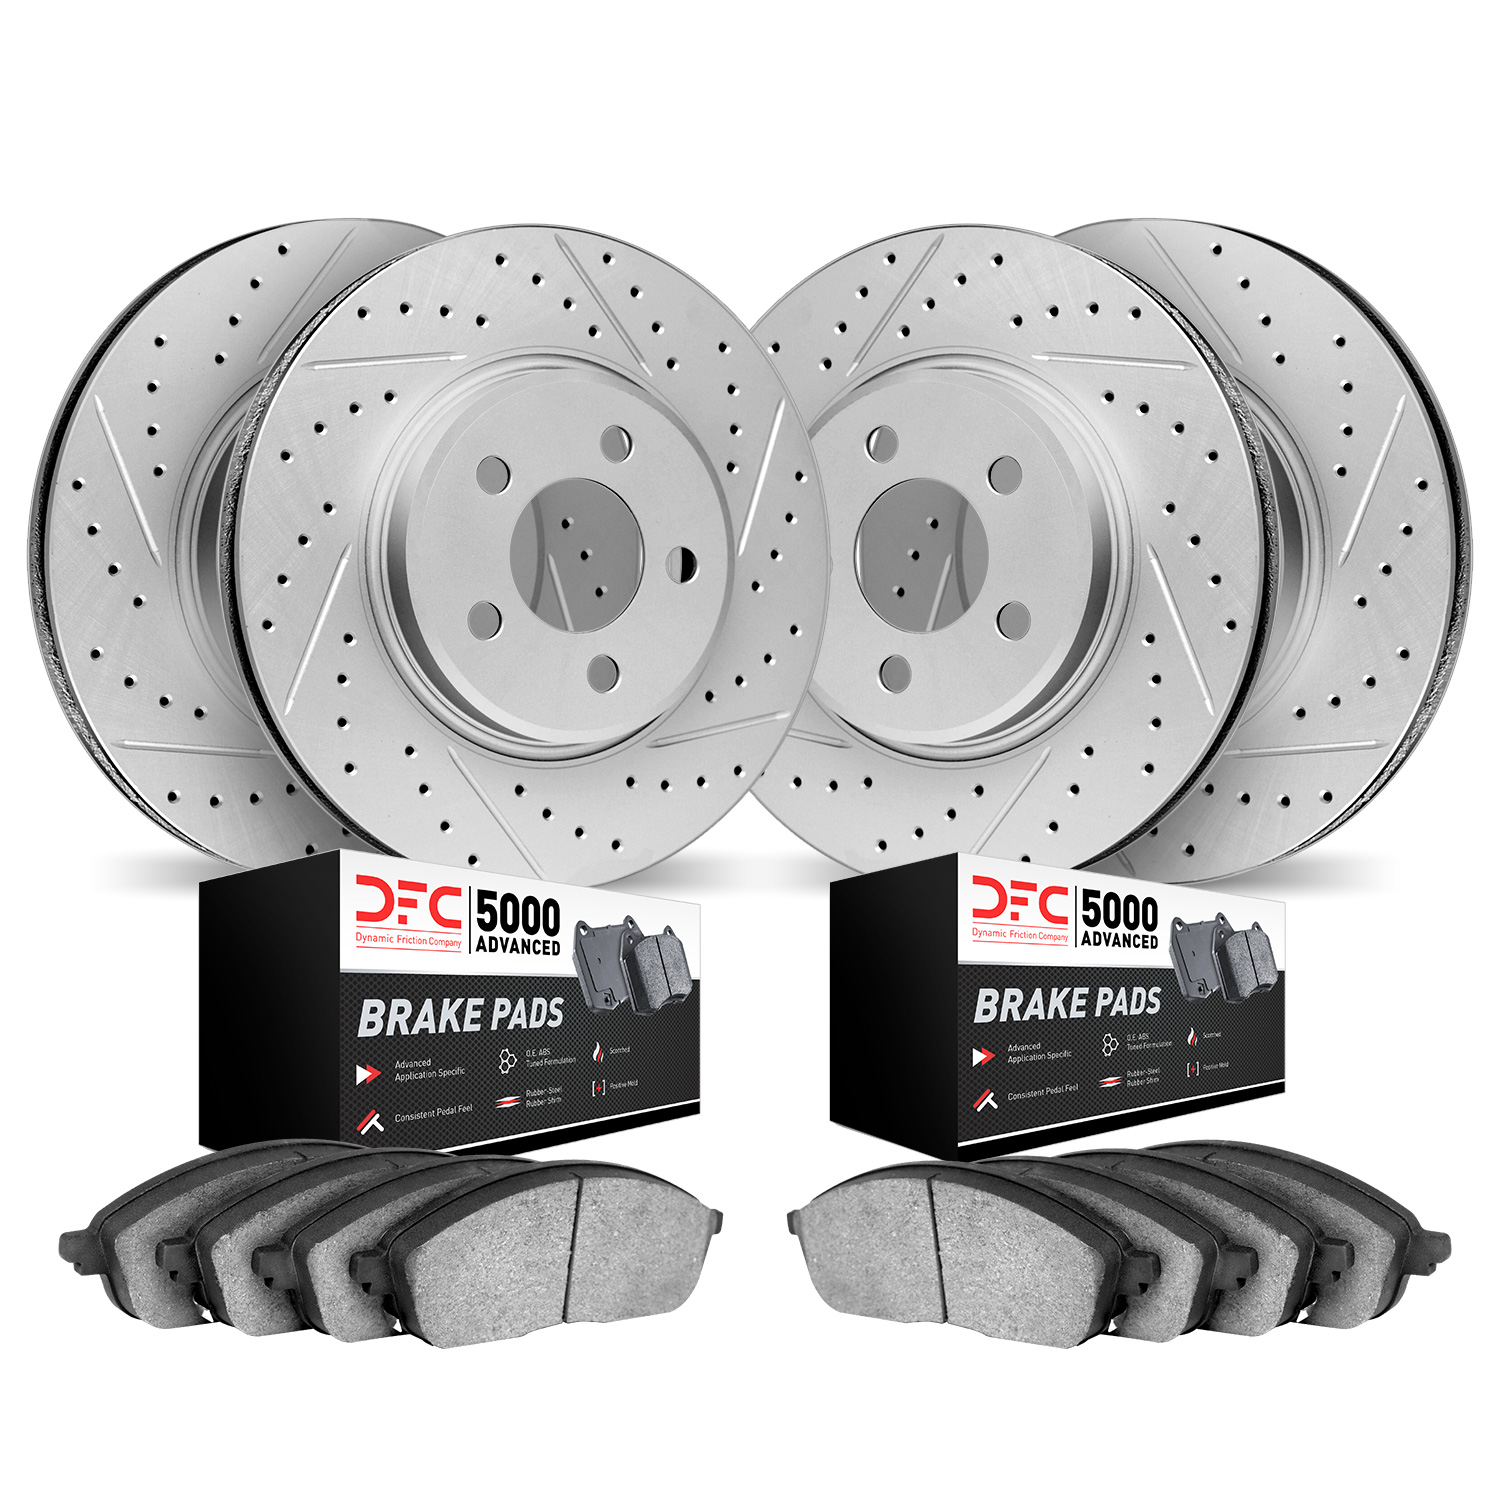 2504-20011 Geoperformance Drilled/Slotted Rotors w/5000 Advanced Brake Pads Kit, 2019-2020 Jaguar, Position: Front and Rear